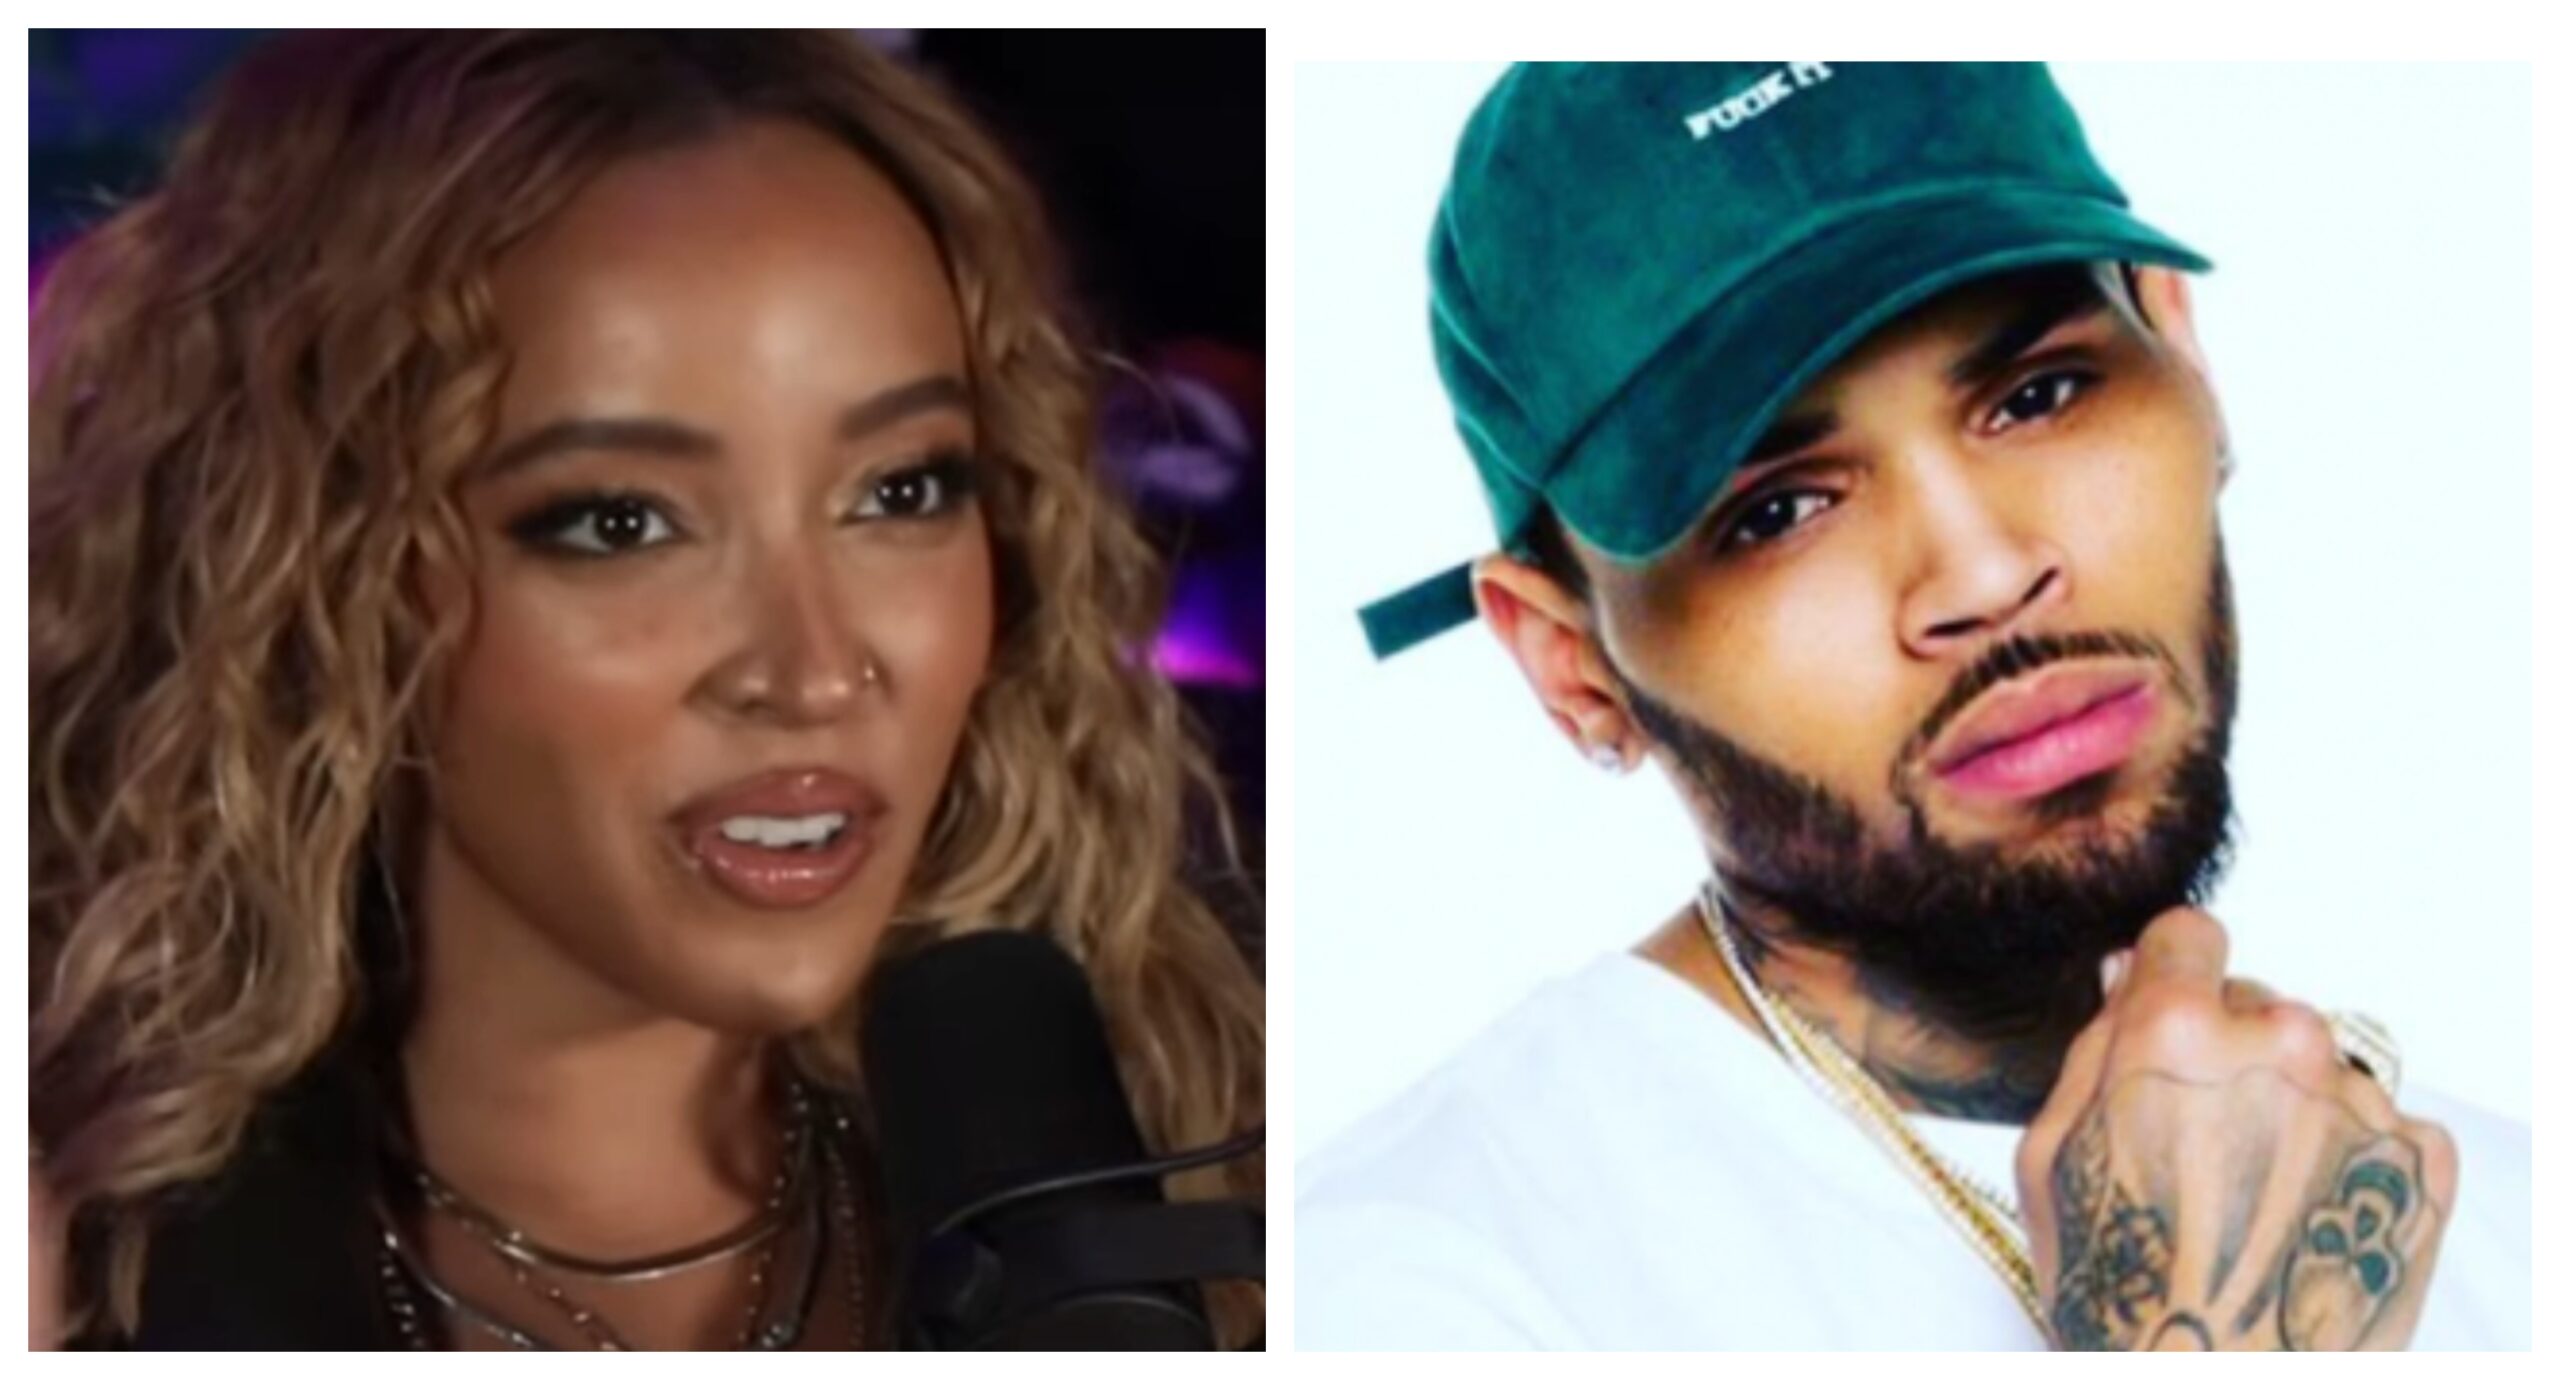 Chris Brown Slams Tinashe After Singer’s Remarks About Their Collab: “Name 5 Tinashe Songs”